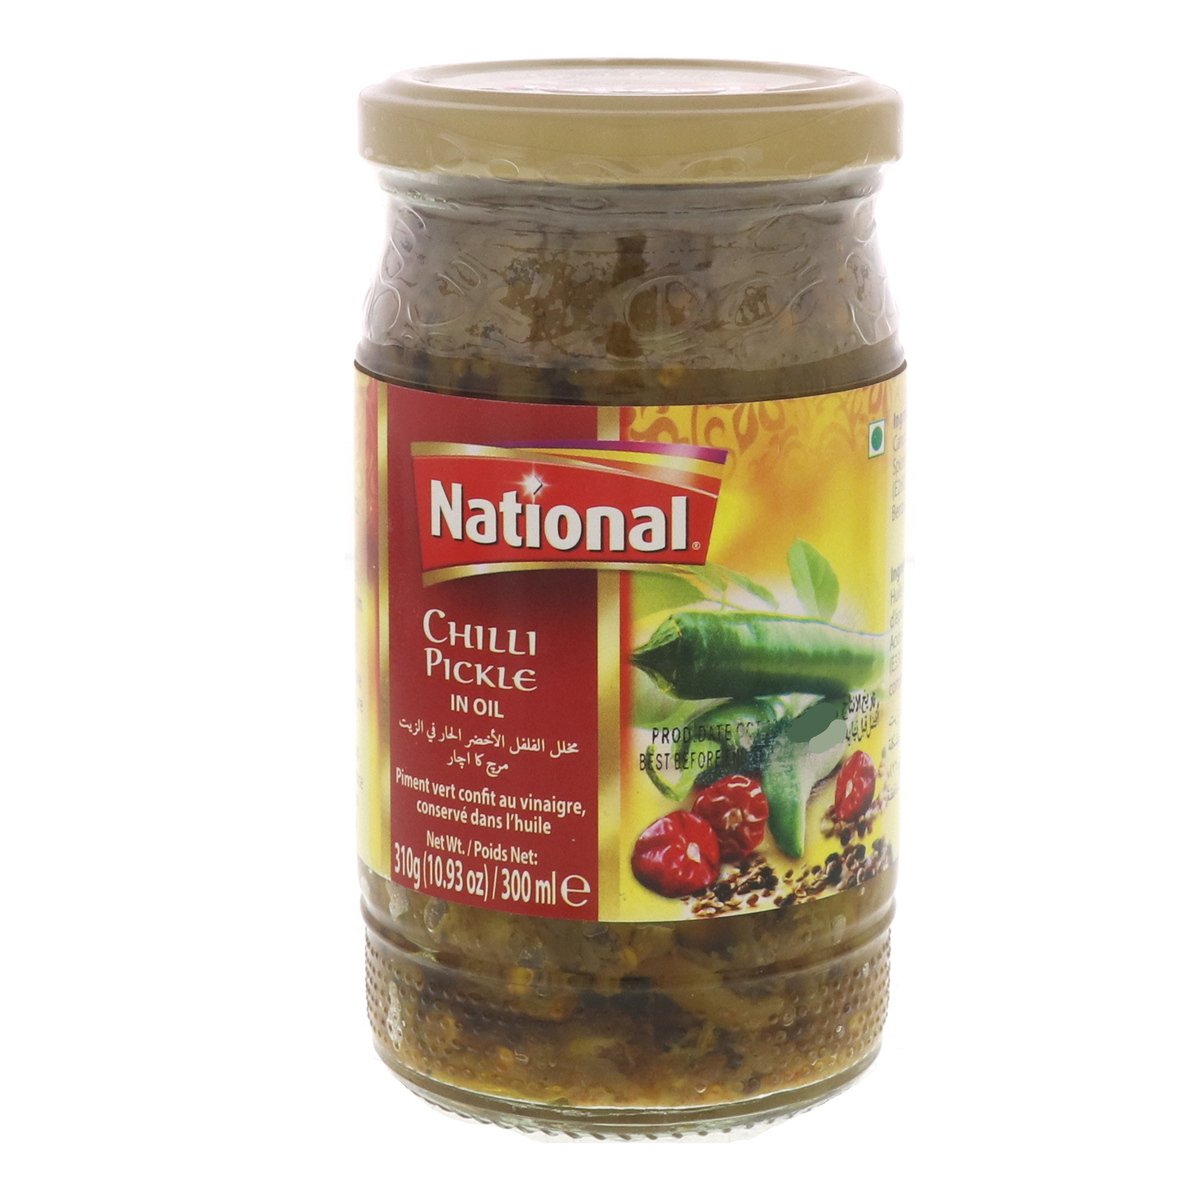 National Chilli Pickle In Oil 310g